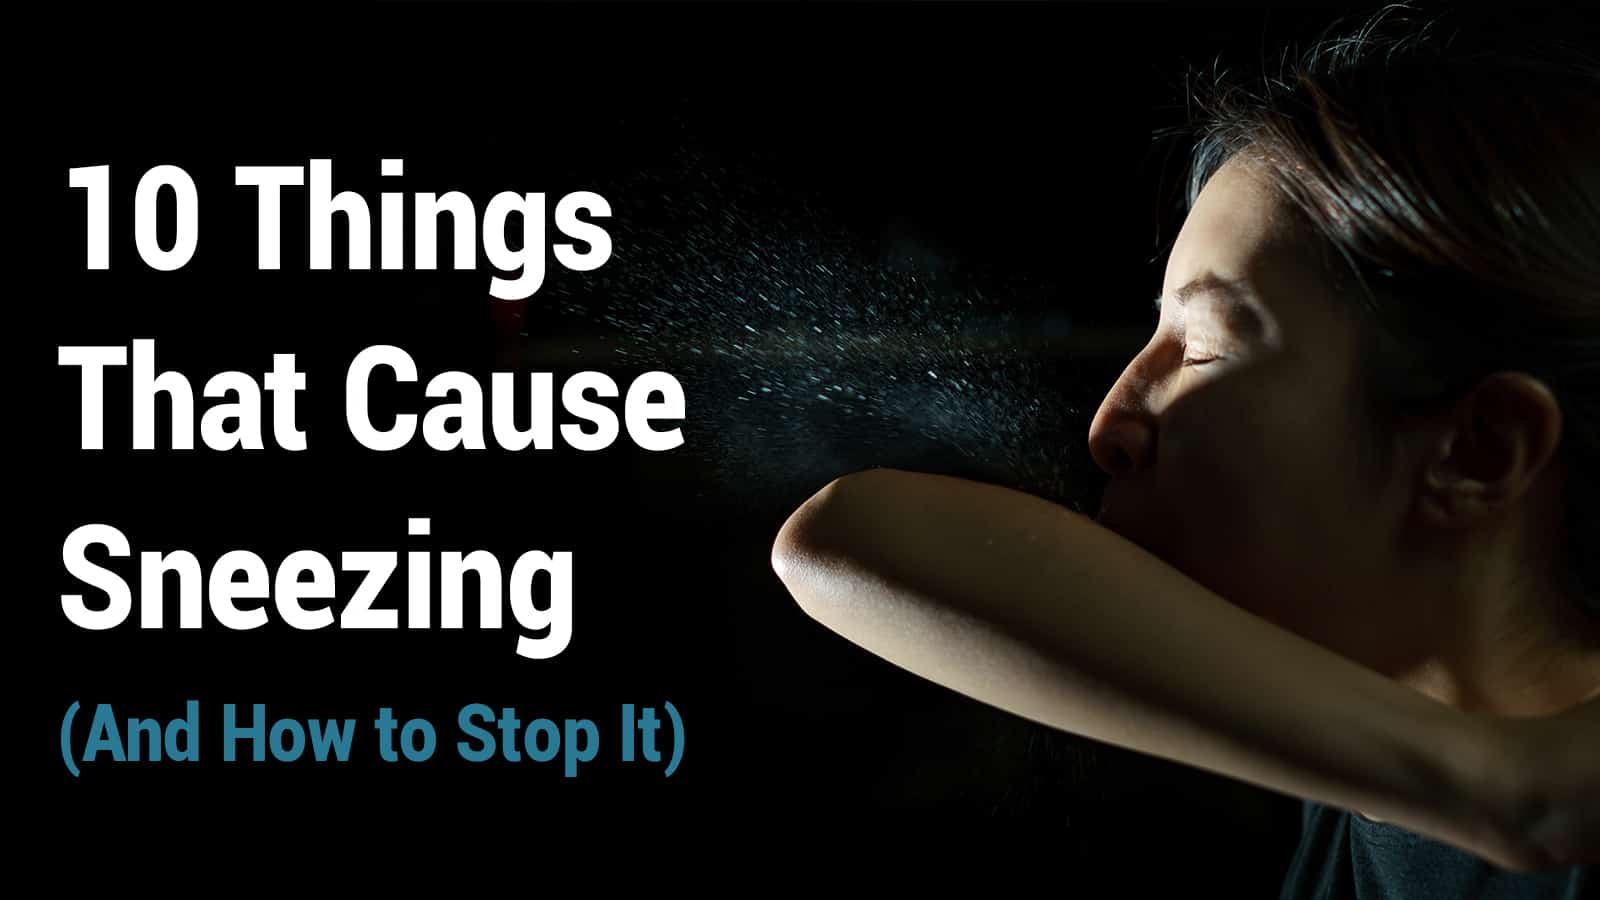 10 Things That Cause Sneezing (And How to Stop It)